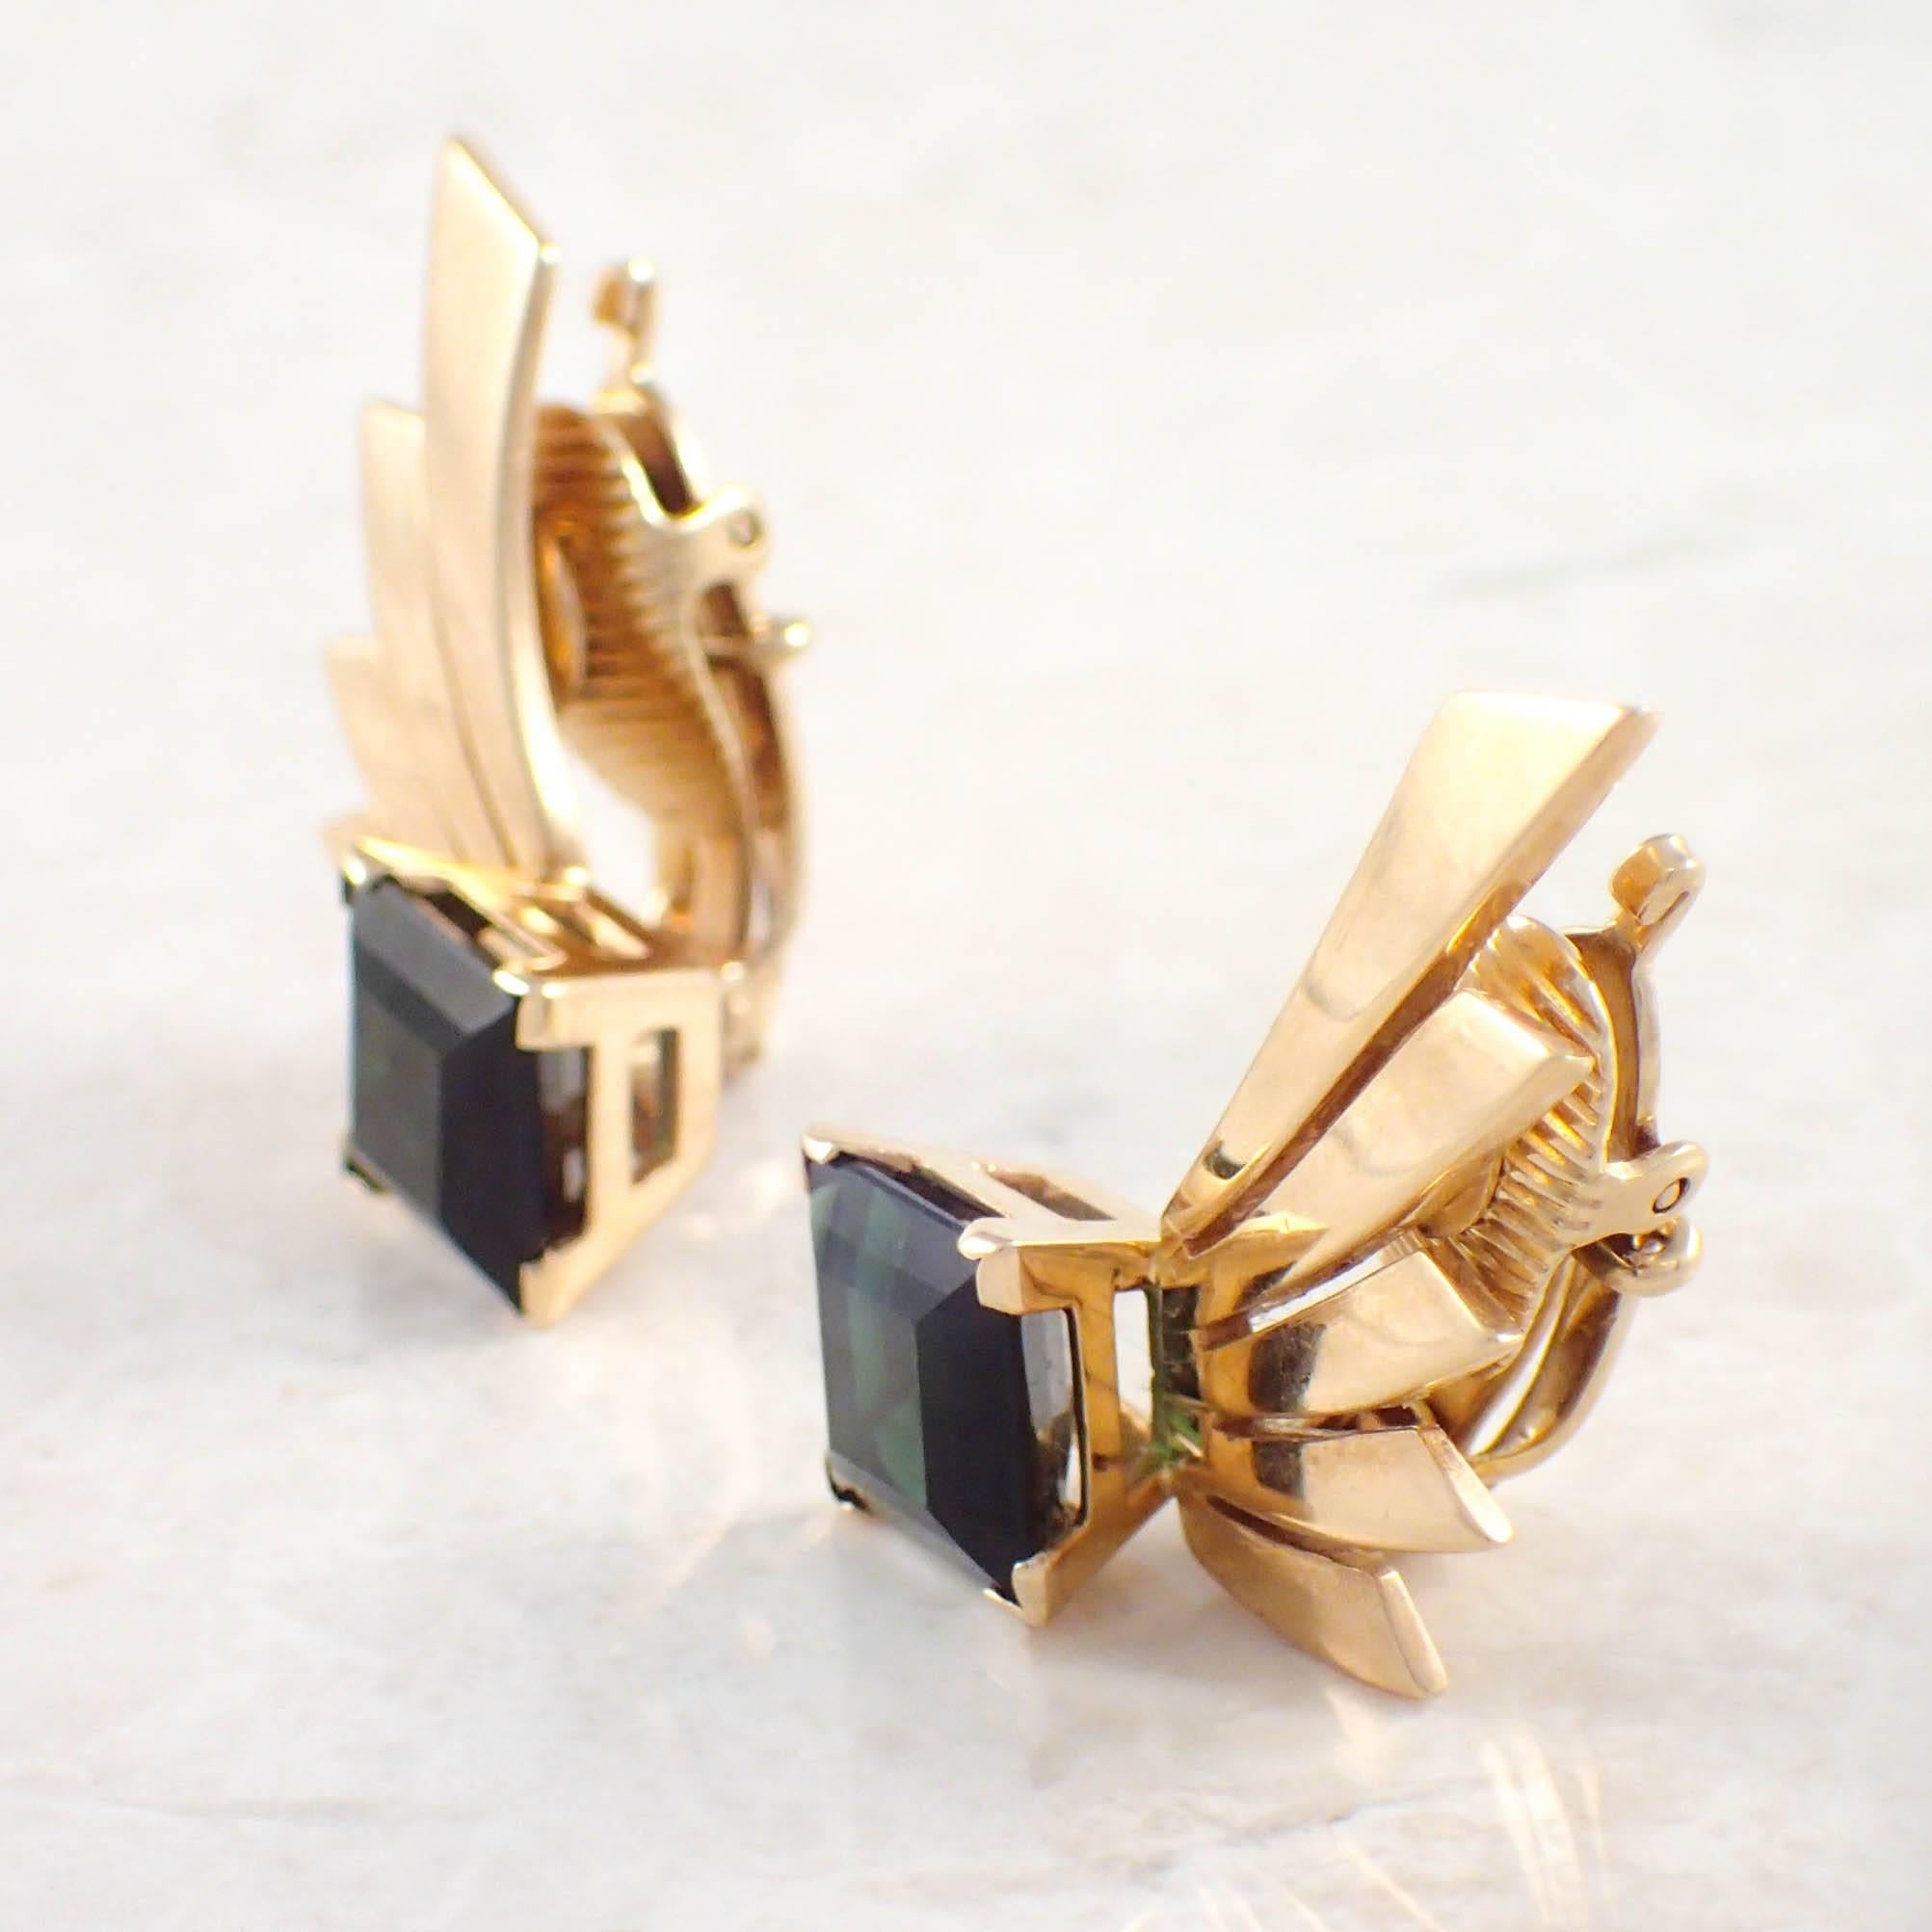 14K Yellow gold tourmaline Tiffany & Co. earrings.  The retro fan motif set with 2 green square cut tourmaline measuring 8.2 by 8.3 mm. Gold weight 10.7 grams. Stamp Tiffany & Co
Circa 1940s